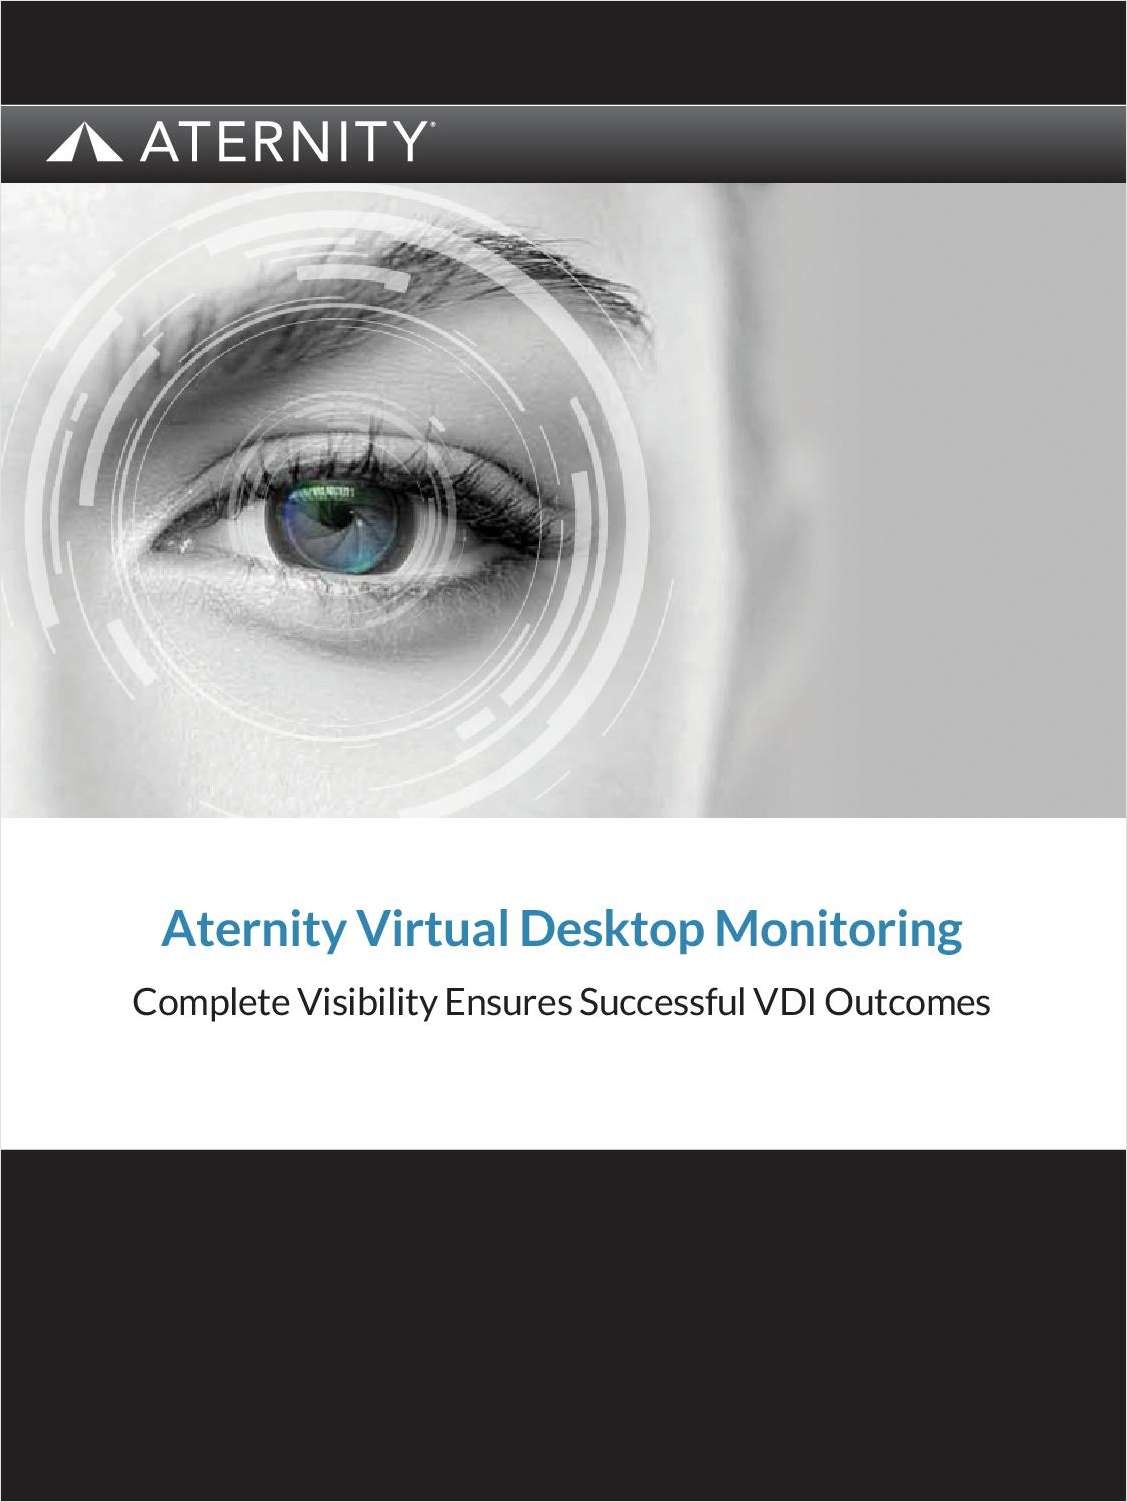 Monitoring End User Experience in a VDI Environment:  Complete Visibility Ensures Successful VDI Outcomes